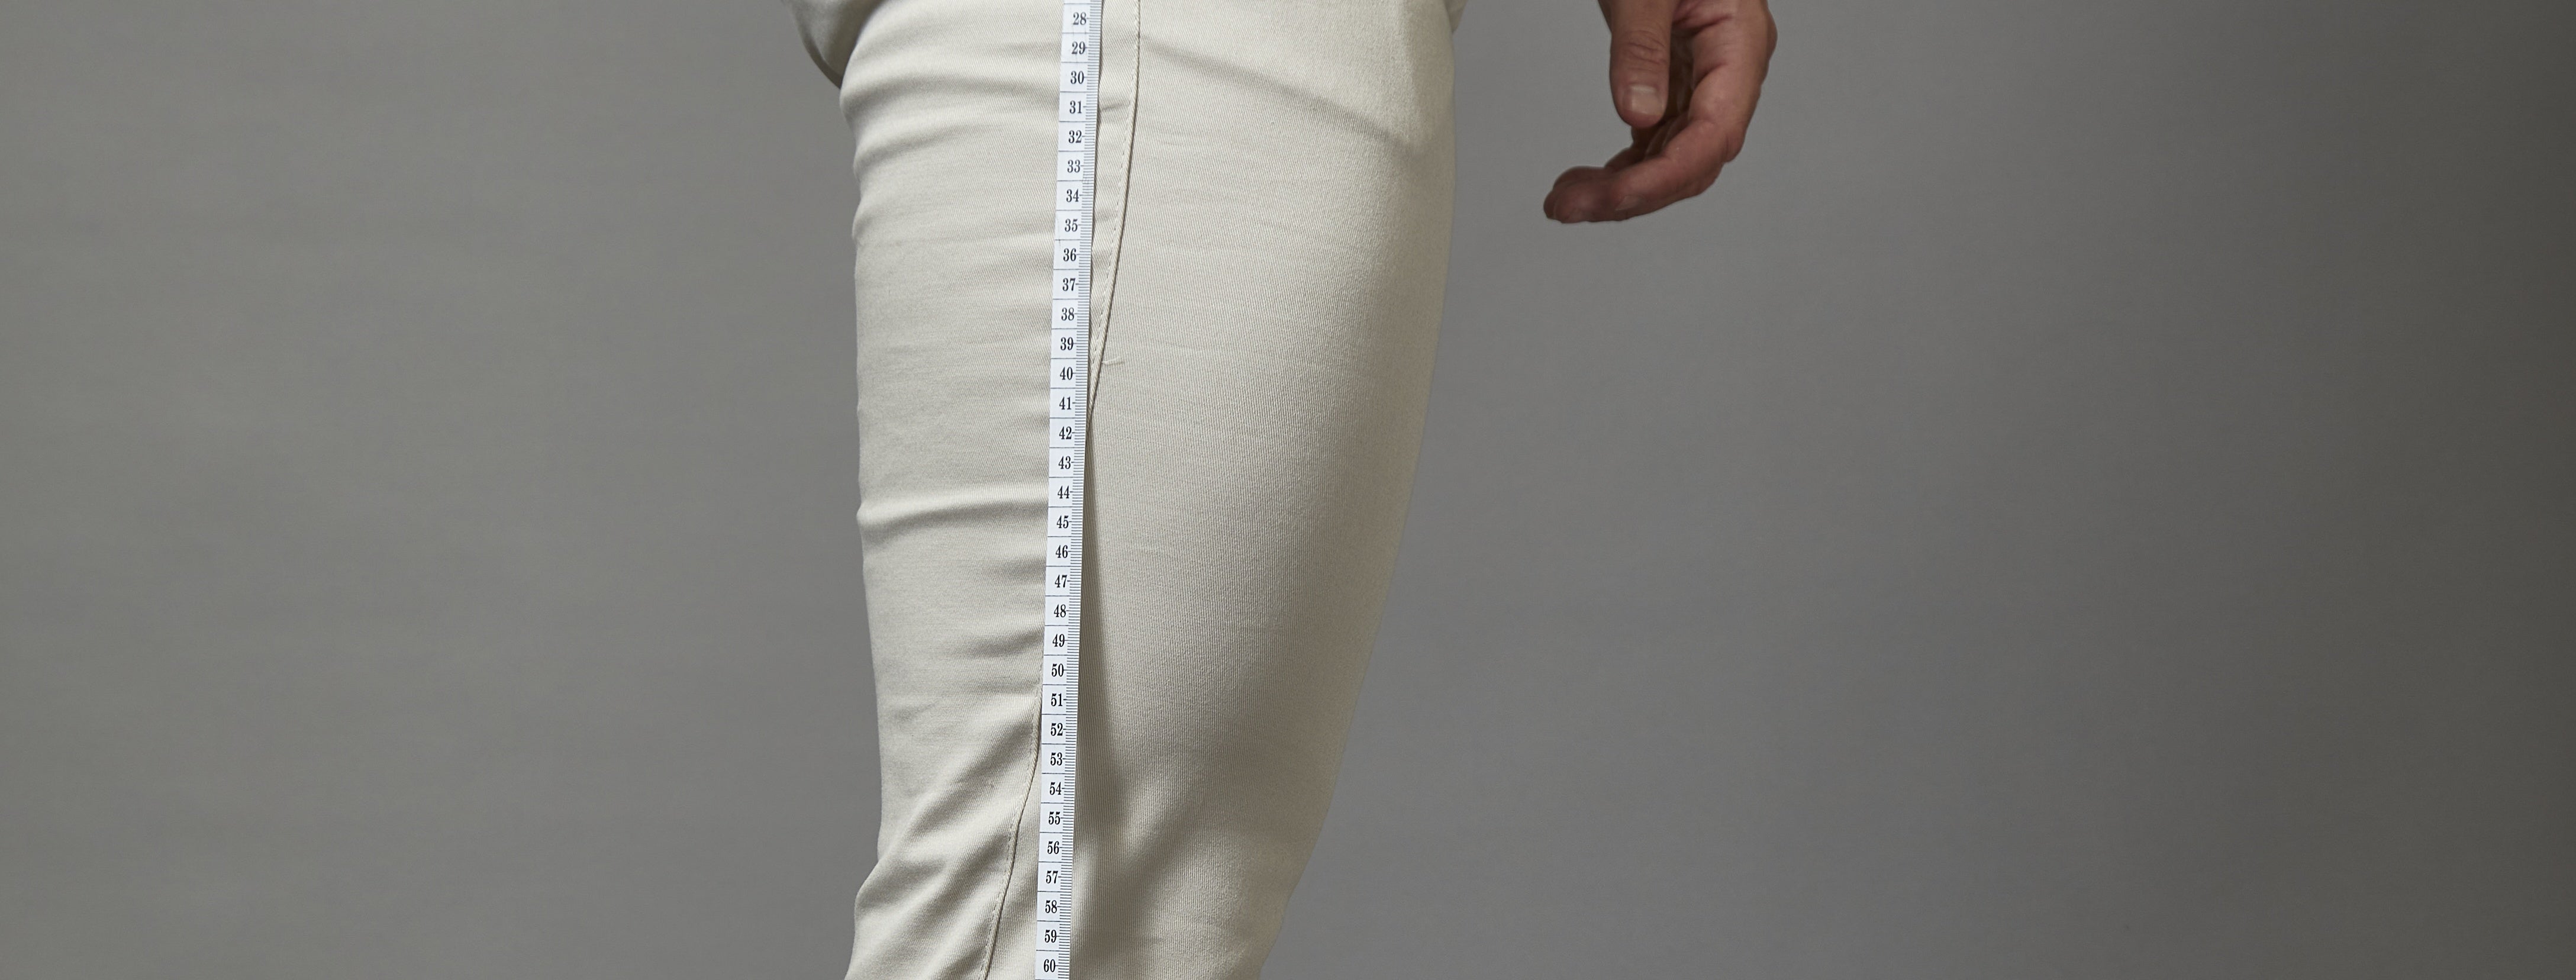 How To Measure Pant Length By Tapered Menswear